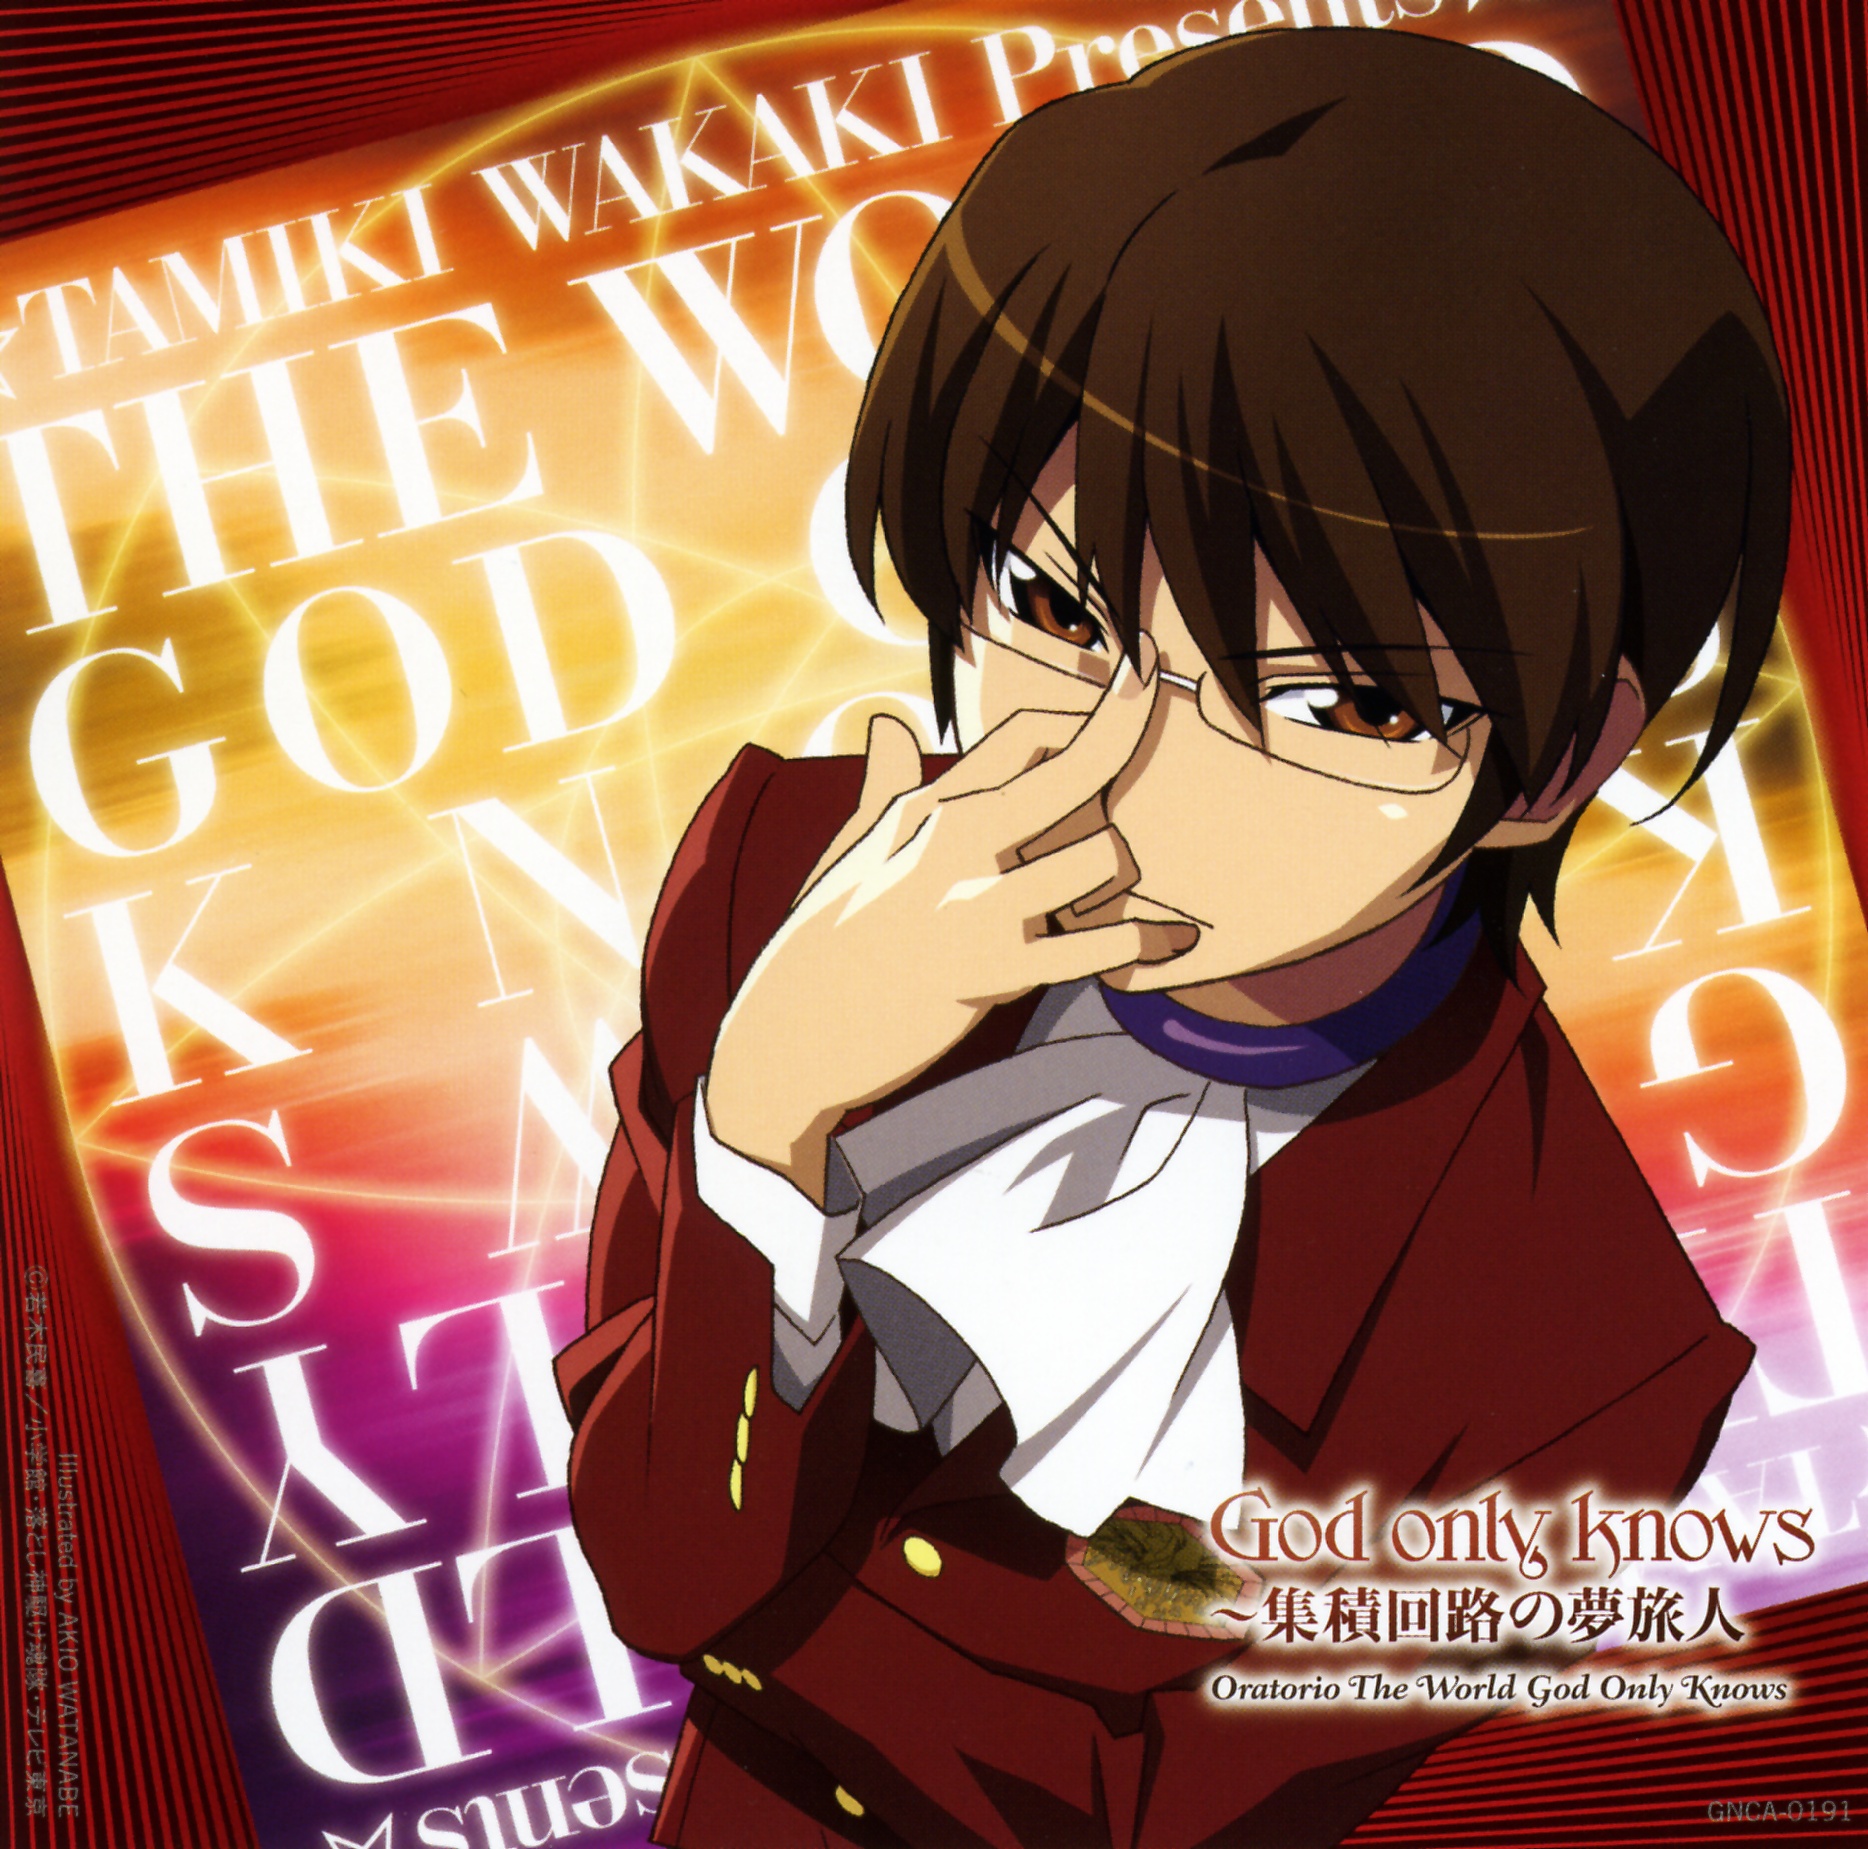 The World God Only Knows 3rd Series Title Is Also Goddesses Arc  News   Anime News Network